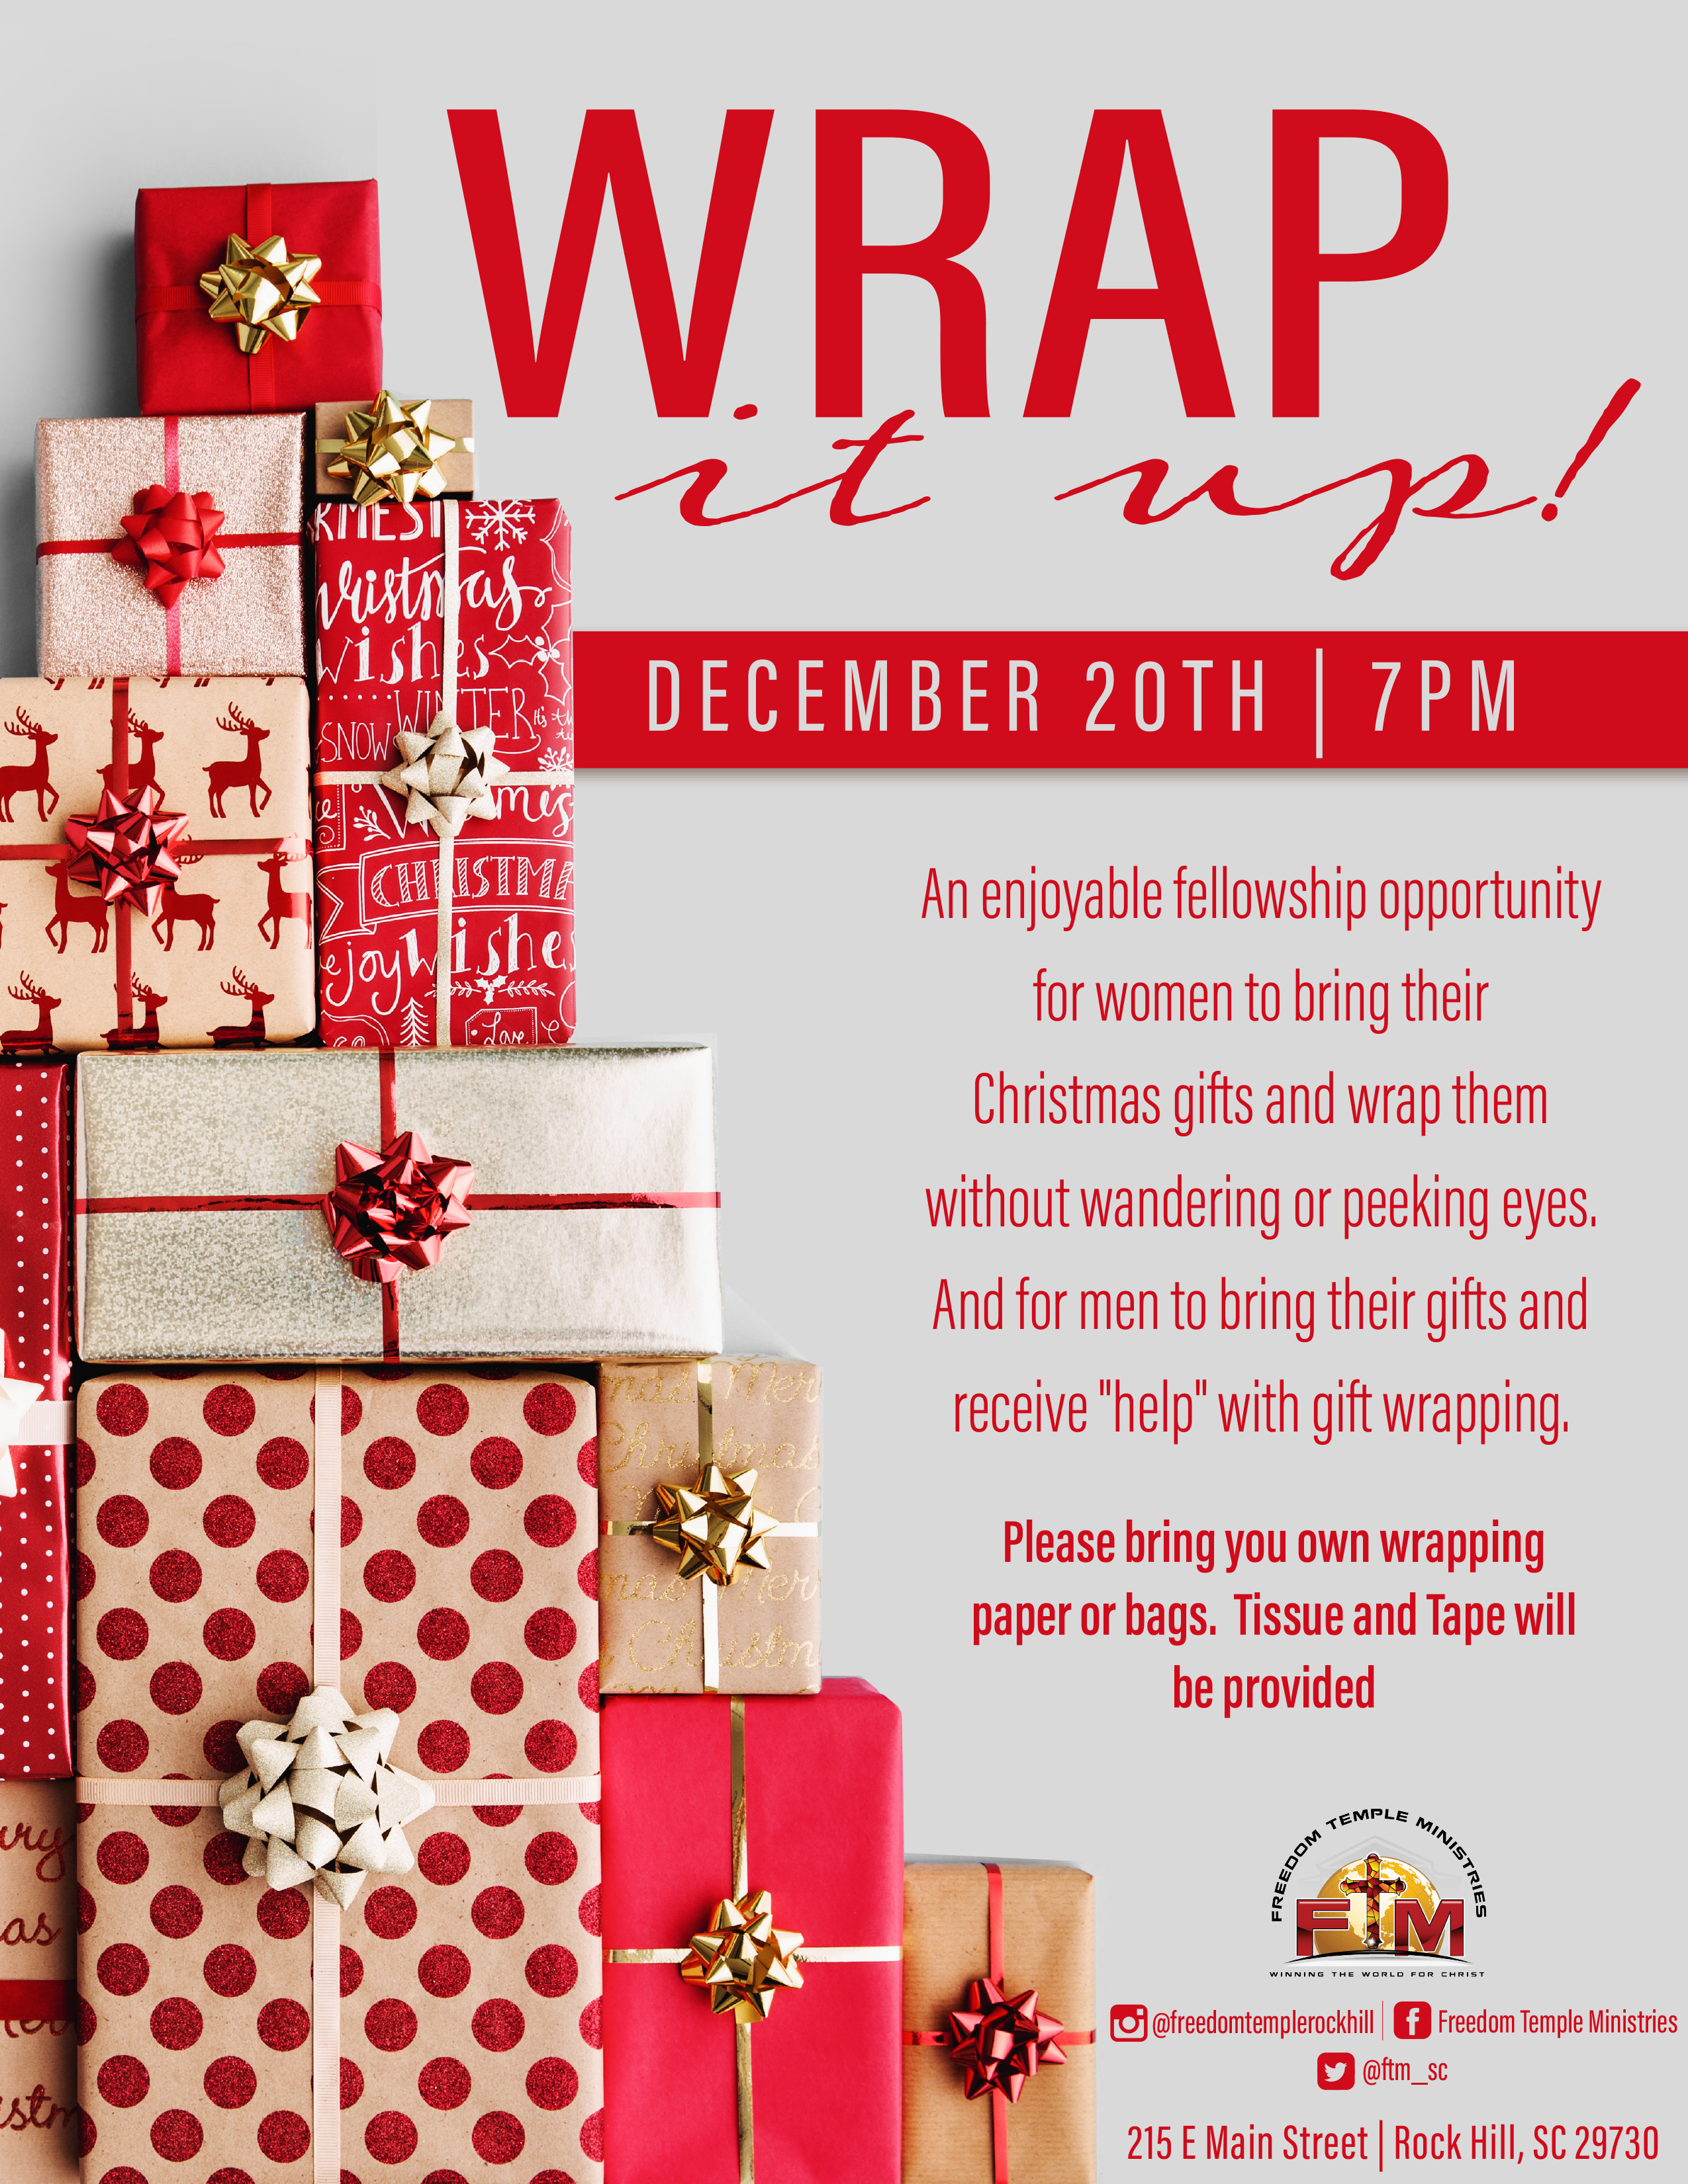 upcoming-events-wrap-it-up-gift-wrapping-session-freedom-temple-ministries